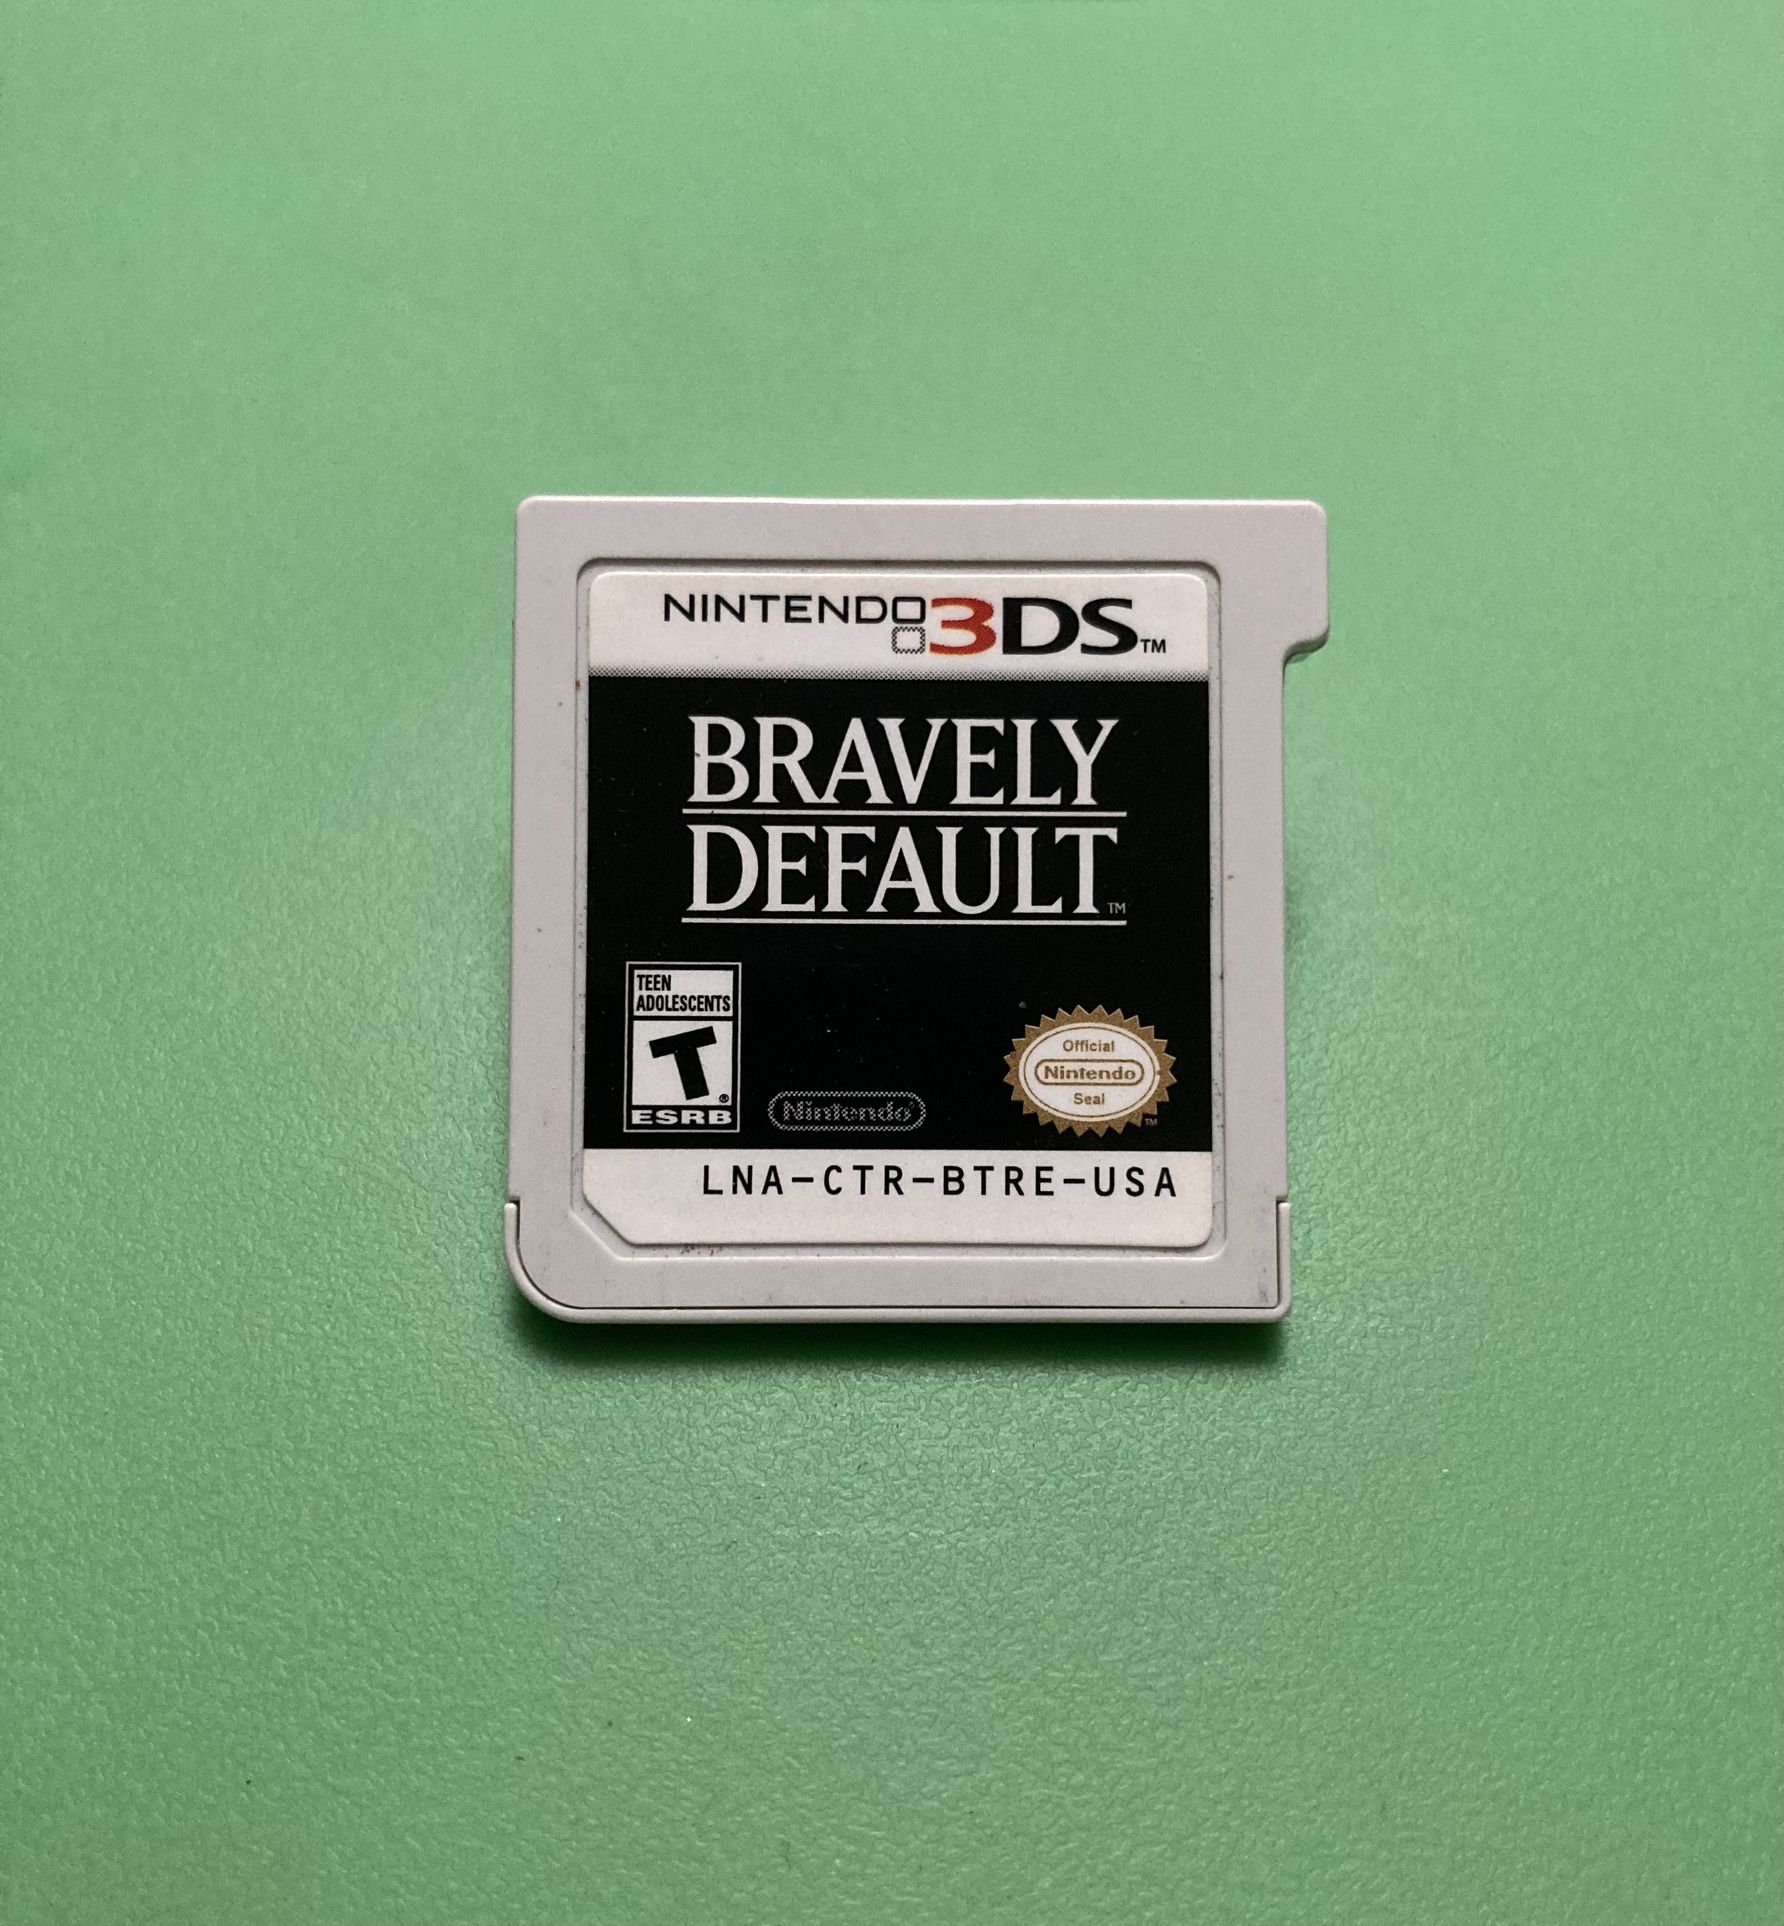 Bravely Default for Nintendo 3DS video game console system or XL New 2ds Square Enix 3D